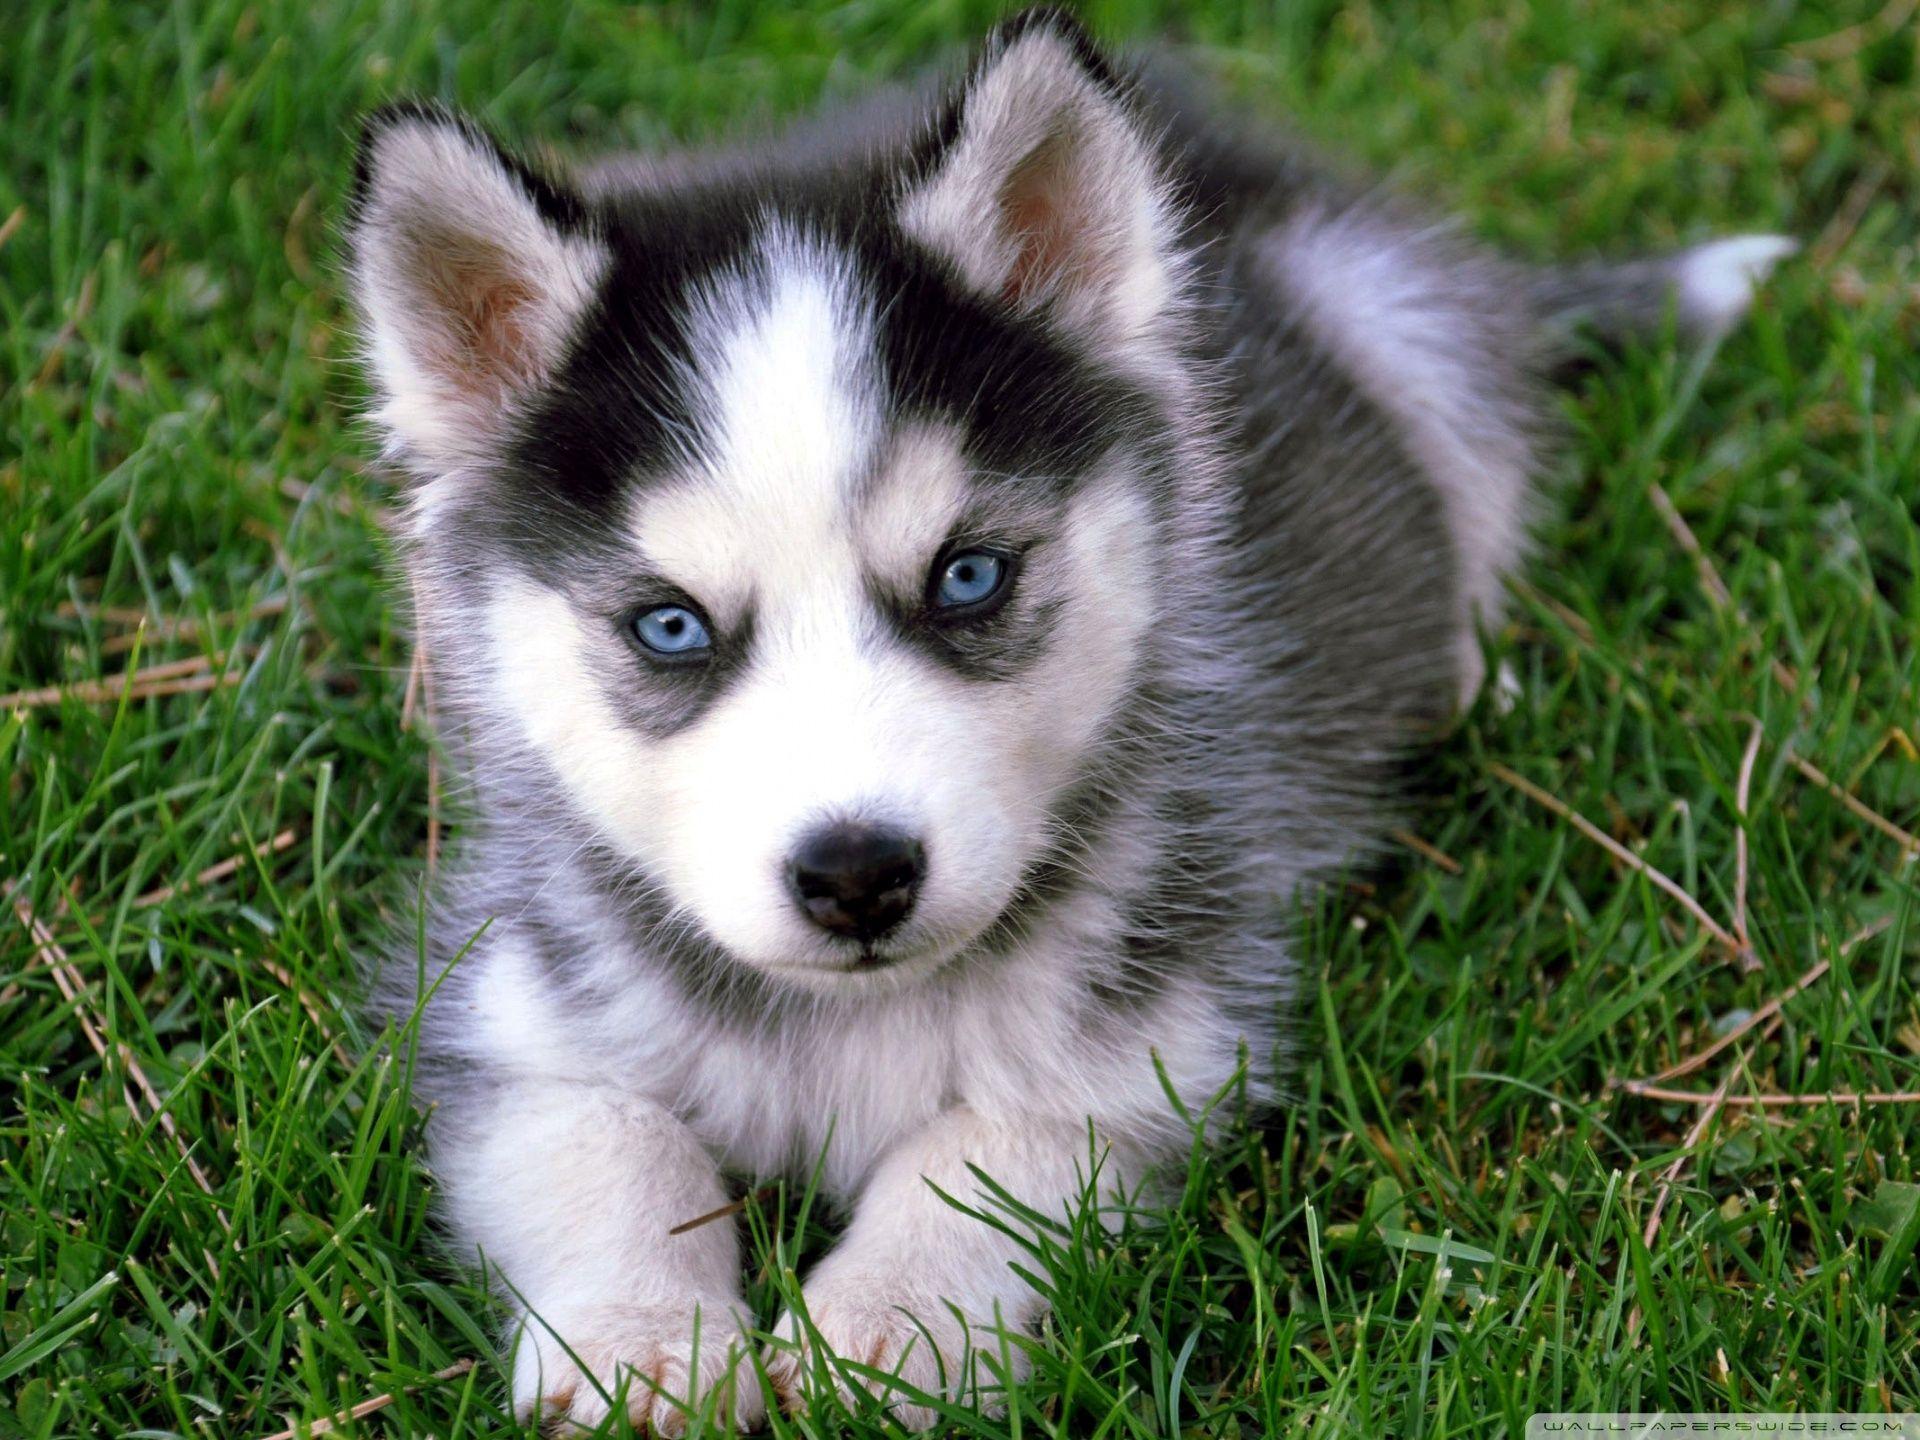 670+ Puppy HD Wallpapers and Backgrounds